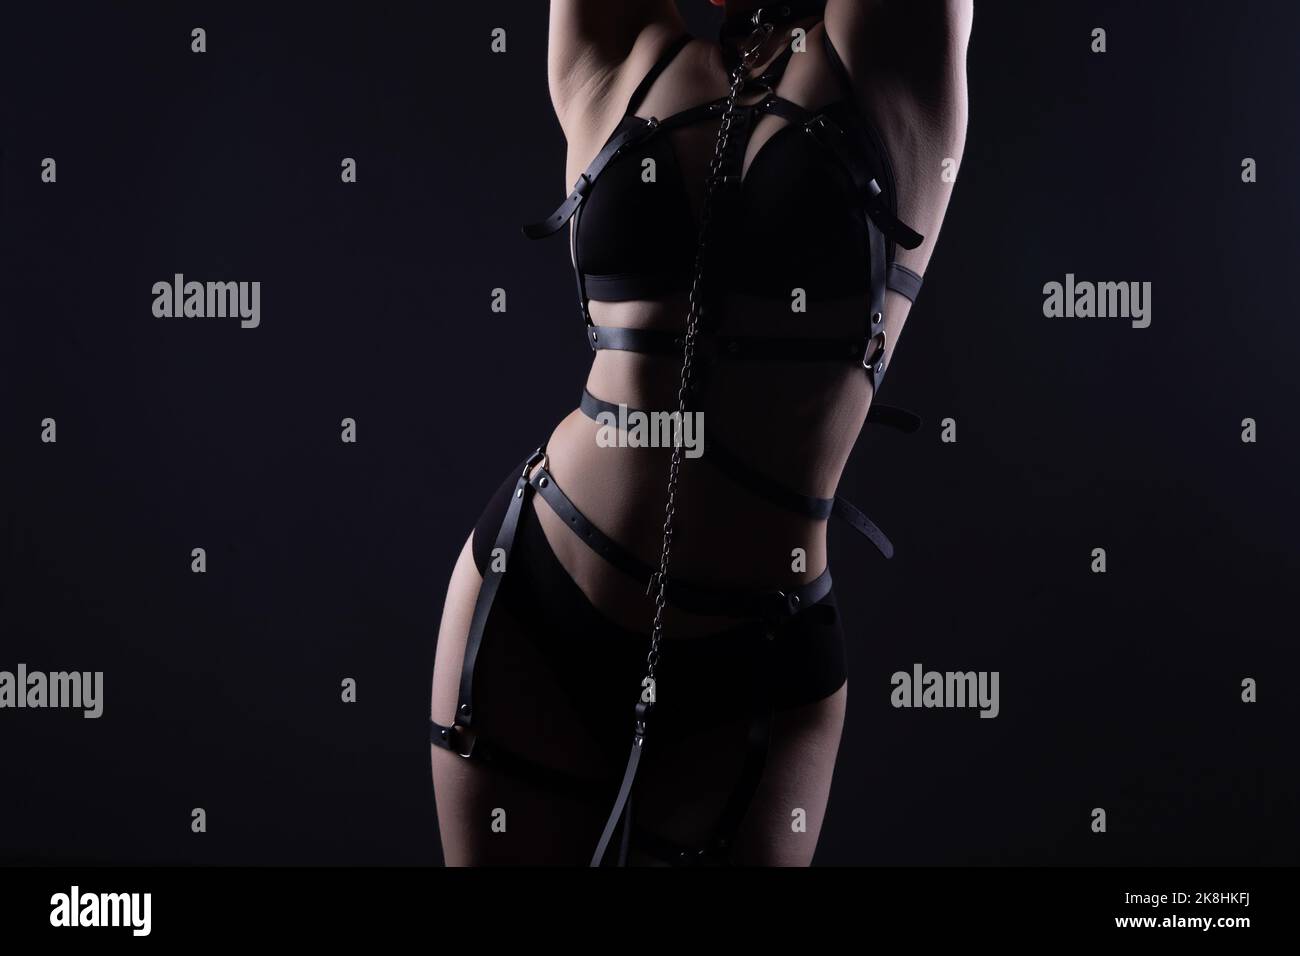 Photo of girls body in lingerie with bandage belt Stock Photo